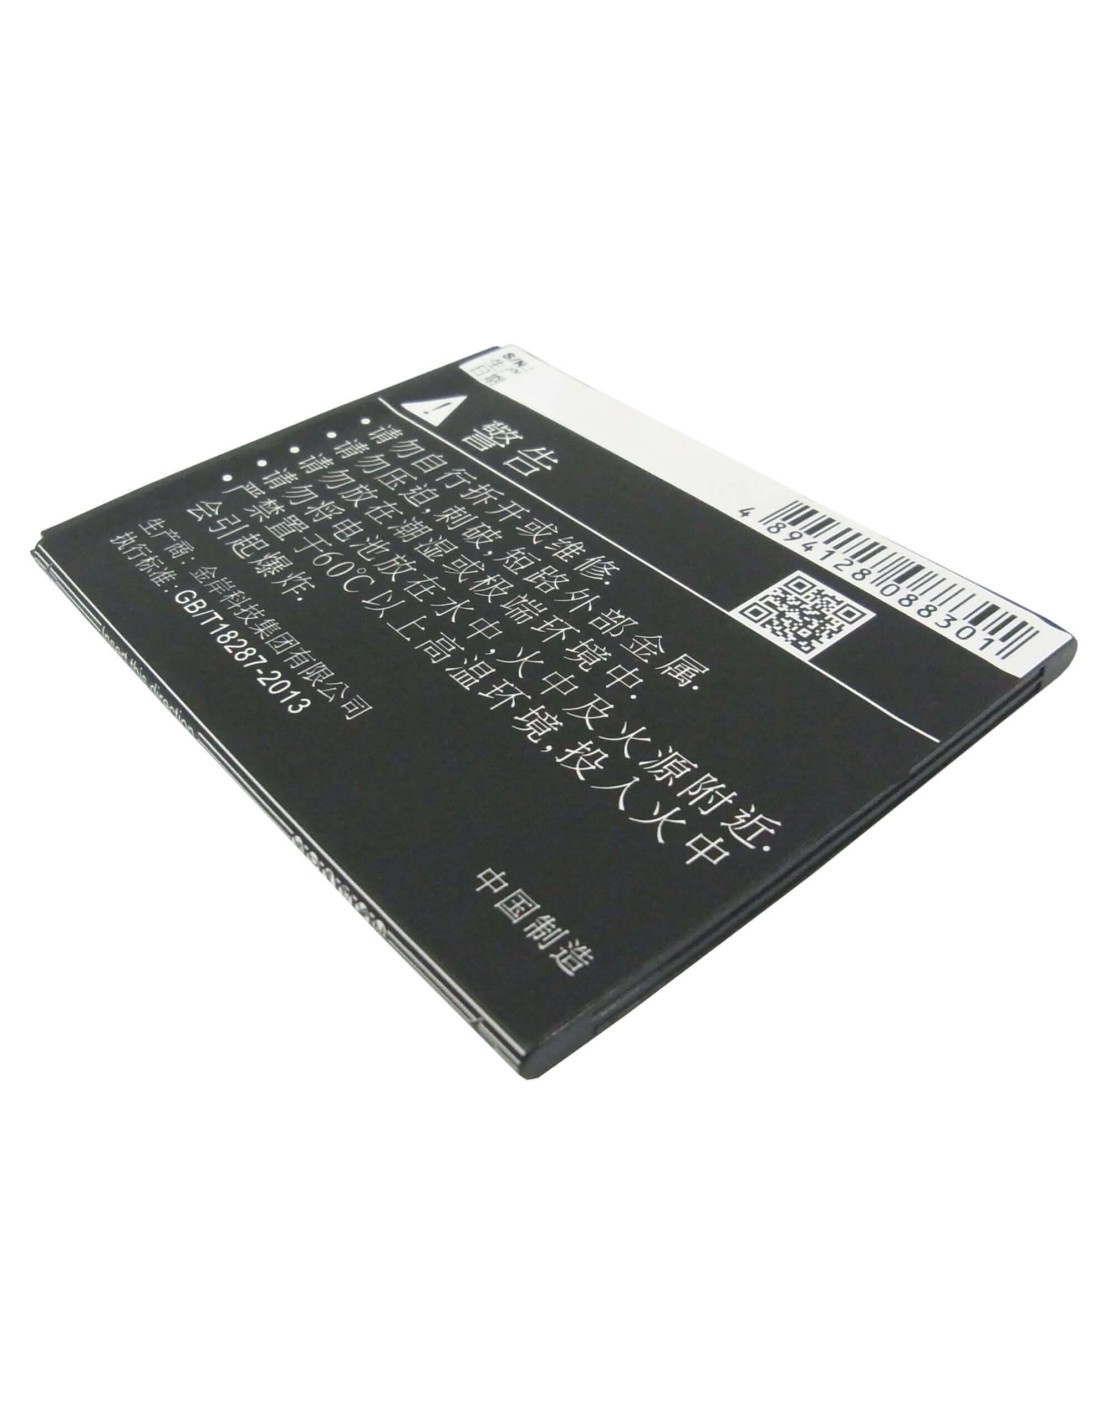 Battery for AMOI 862W, A955T, A900W 3.7V, 1900mAh - 7.03Wh